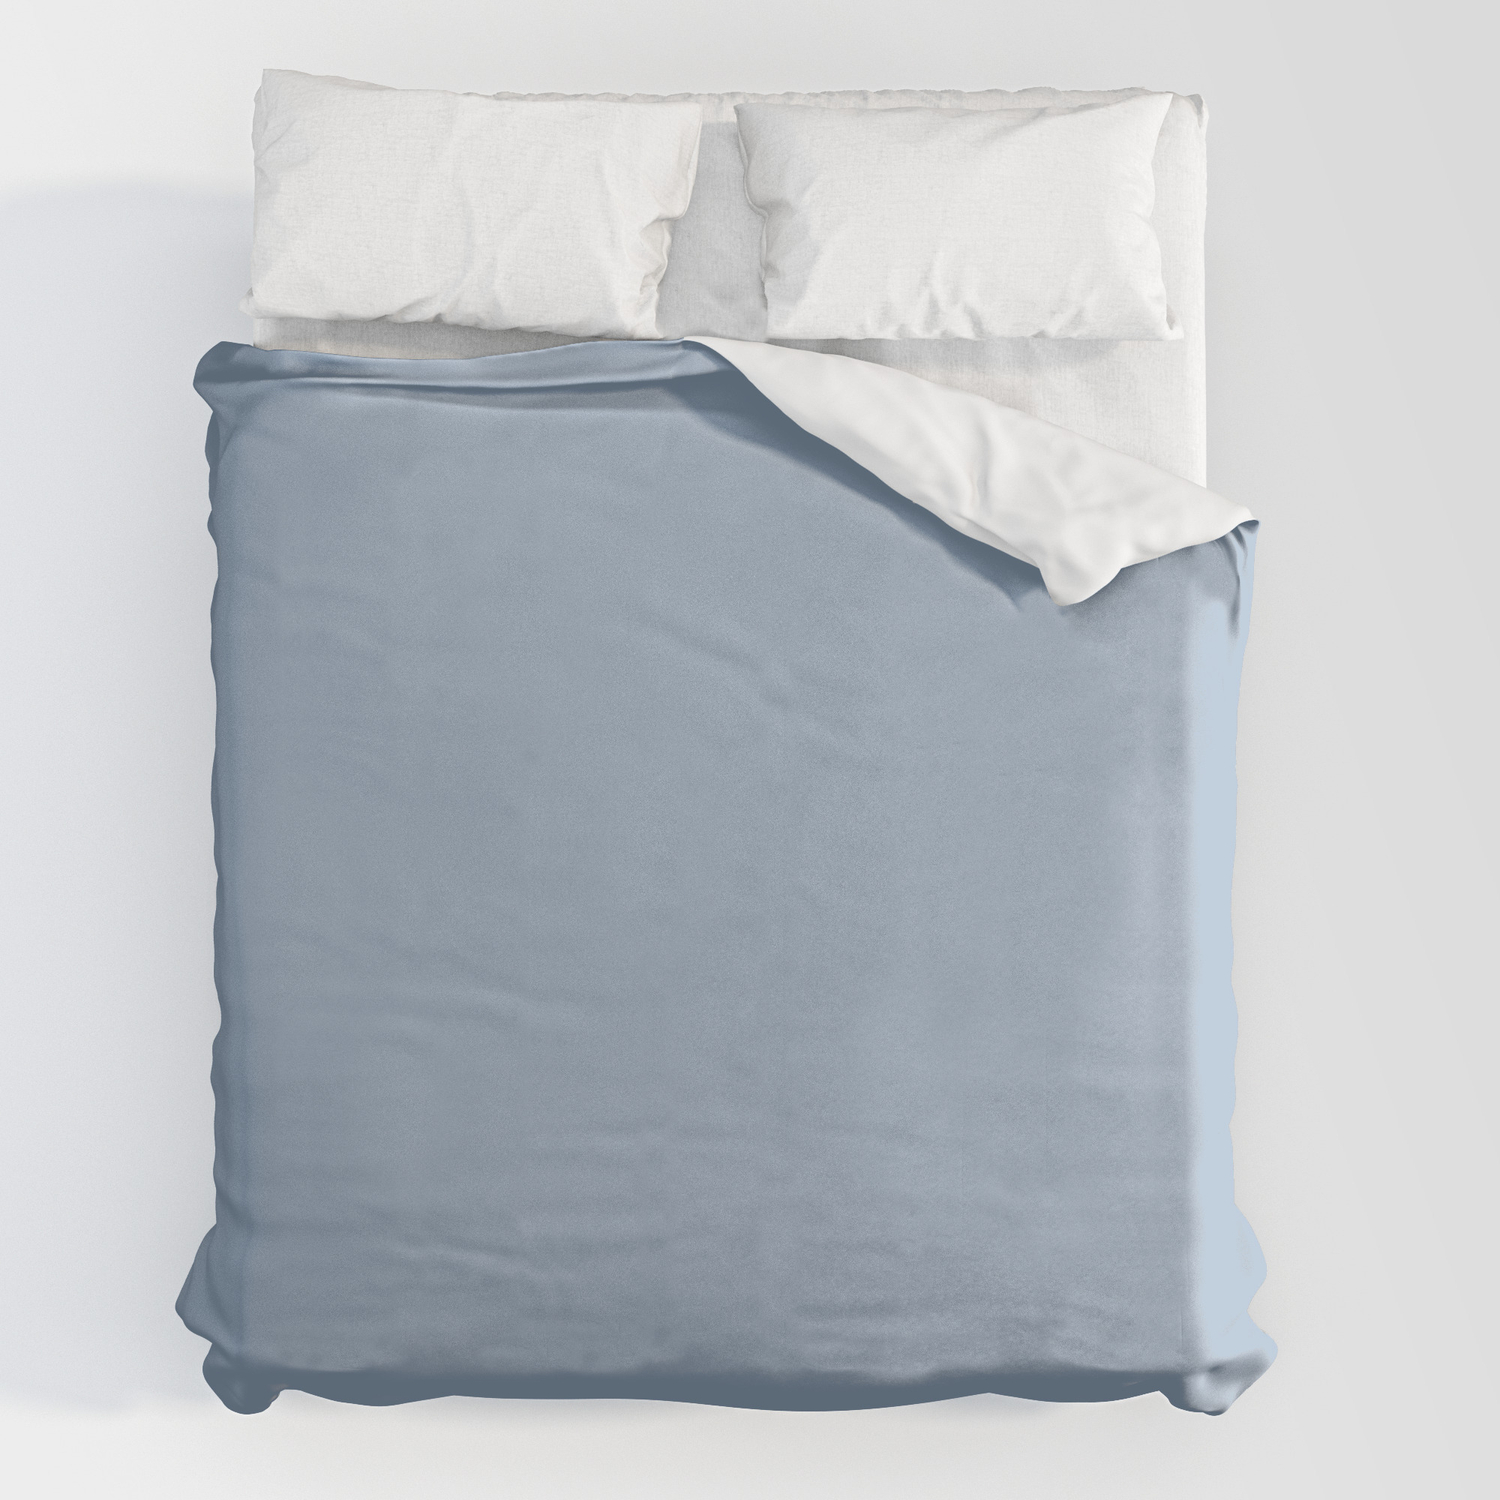 Solid Blue Gray Color Duvet Cover By, Blue Gray Duvet Cover